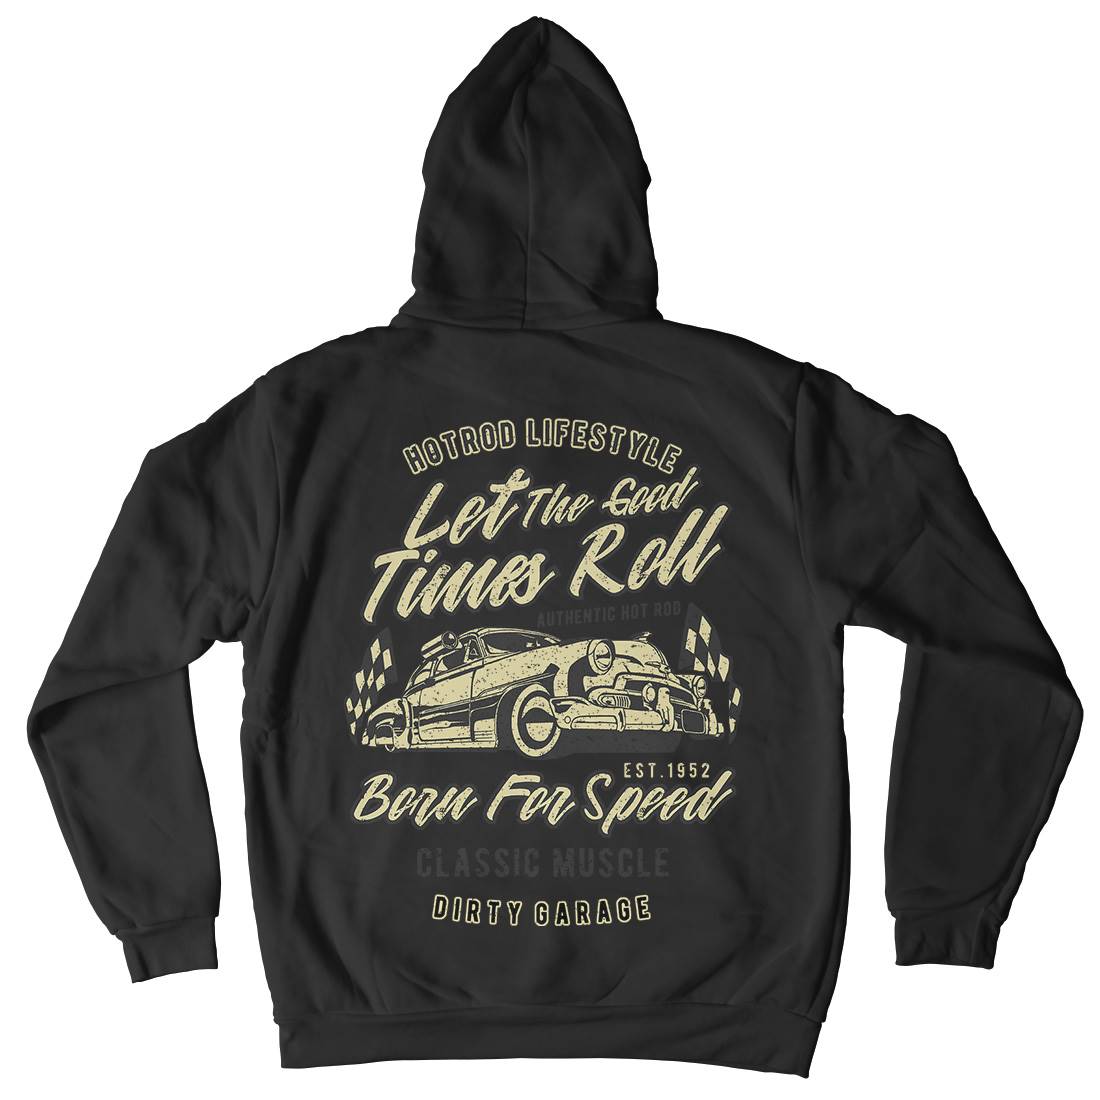 Let The Good Times Roll Kids Crew Neck Hoodie Cars A705